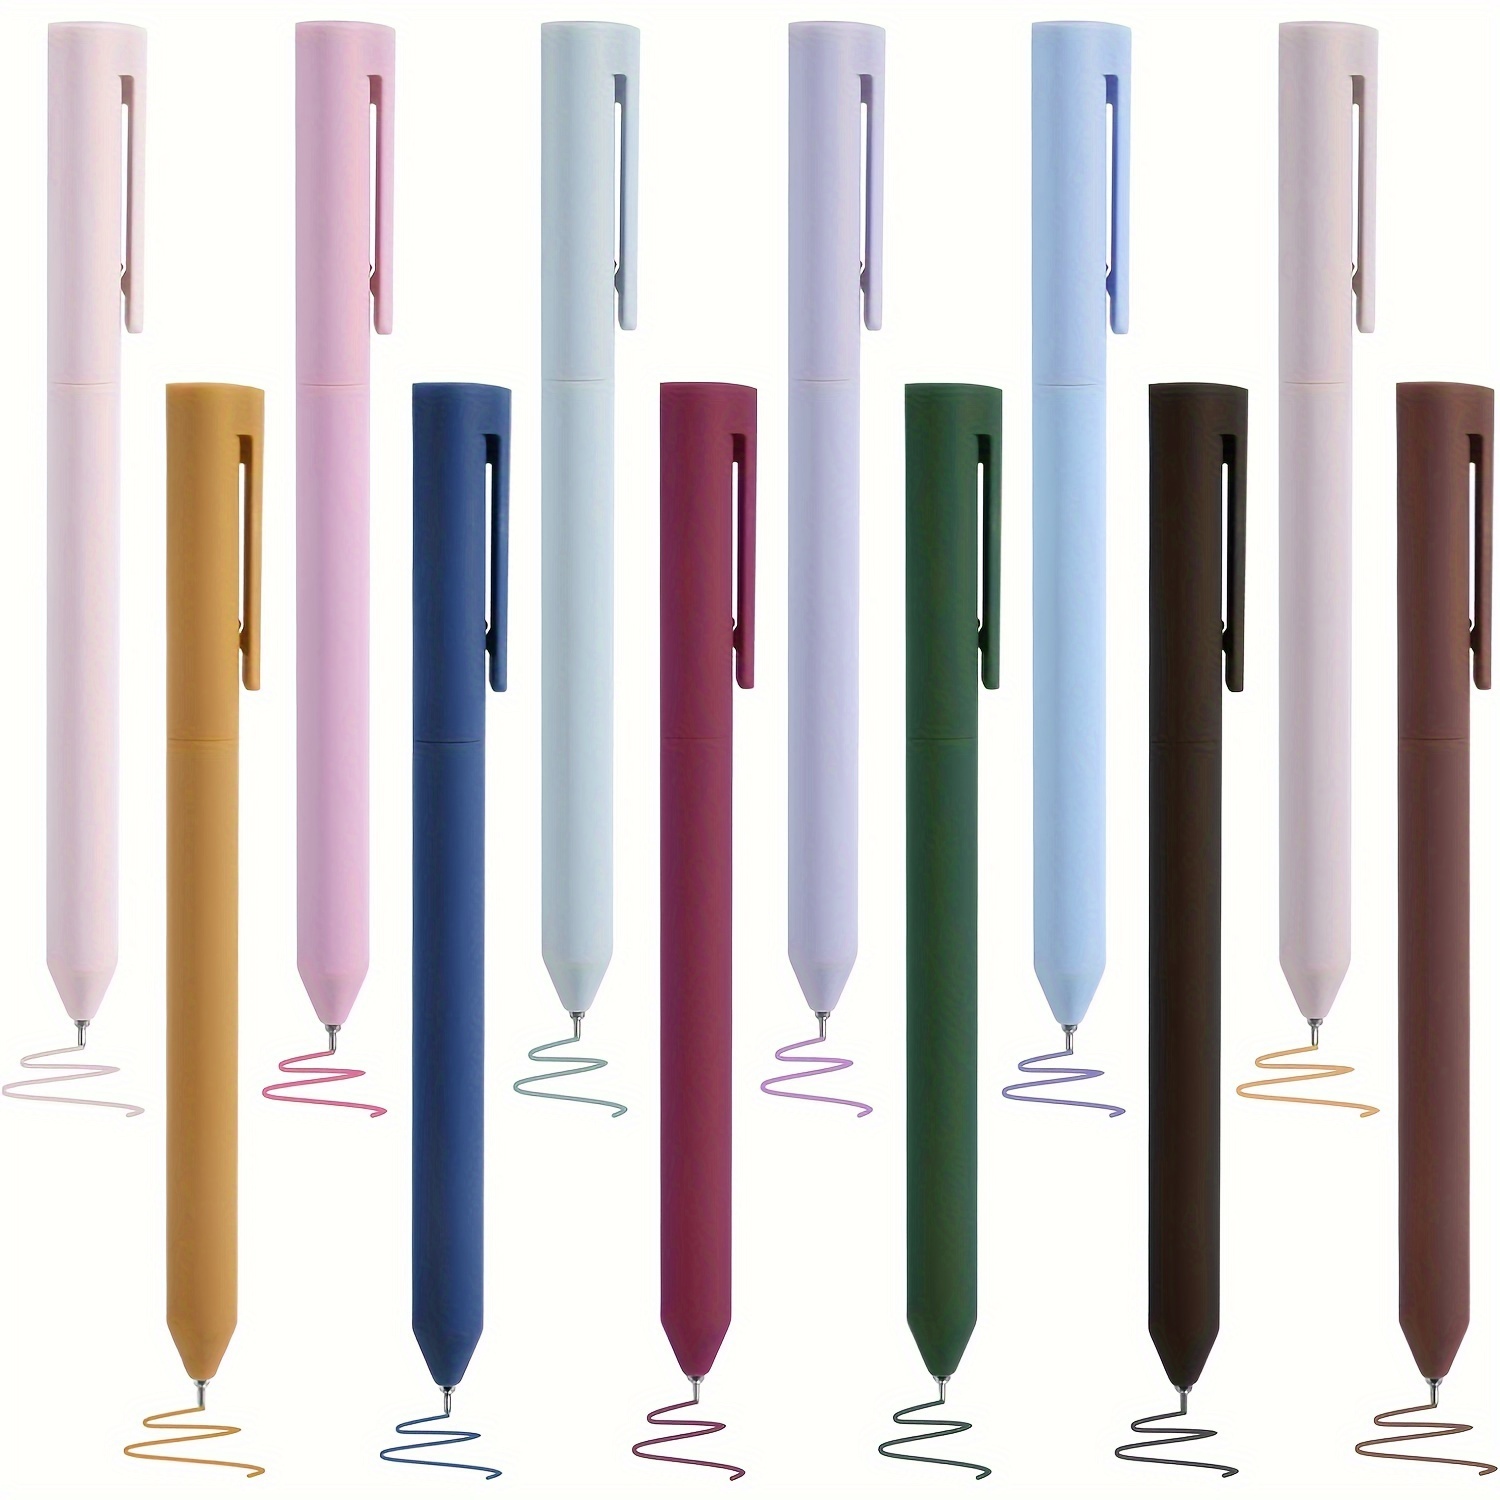 

6pcs Multi-color Gel Pens, Assorted Unique Vintage, Quick Dry Ink Pens For Smooth Writing, Suitable For Learning Supplies, Notepads And Notebooks Stationery